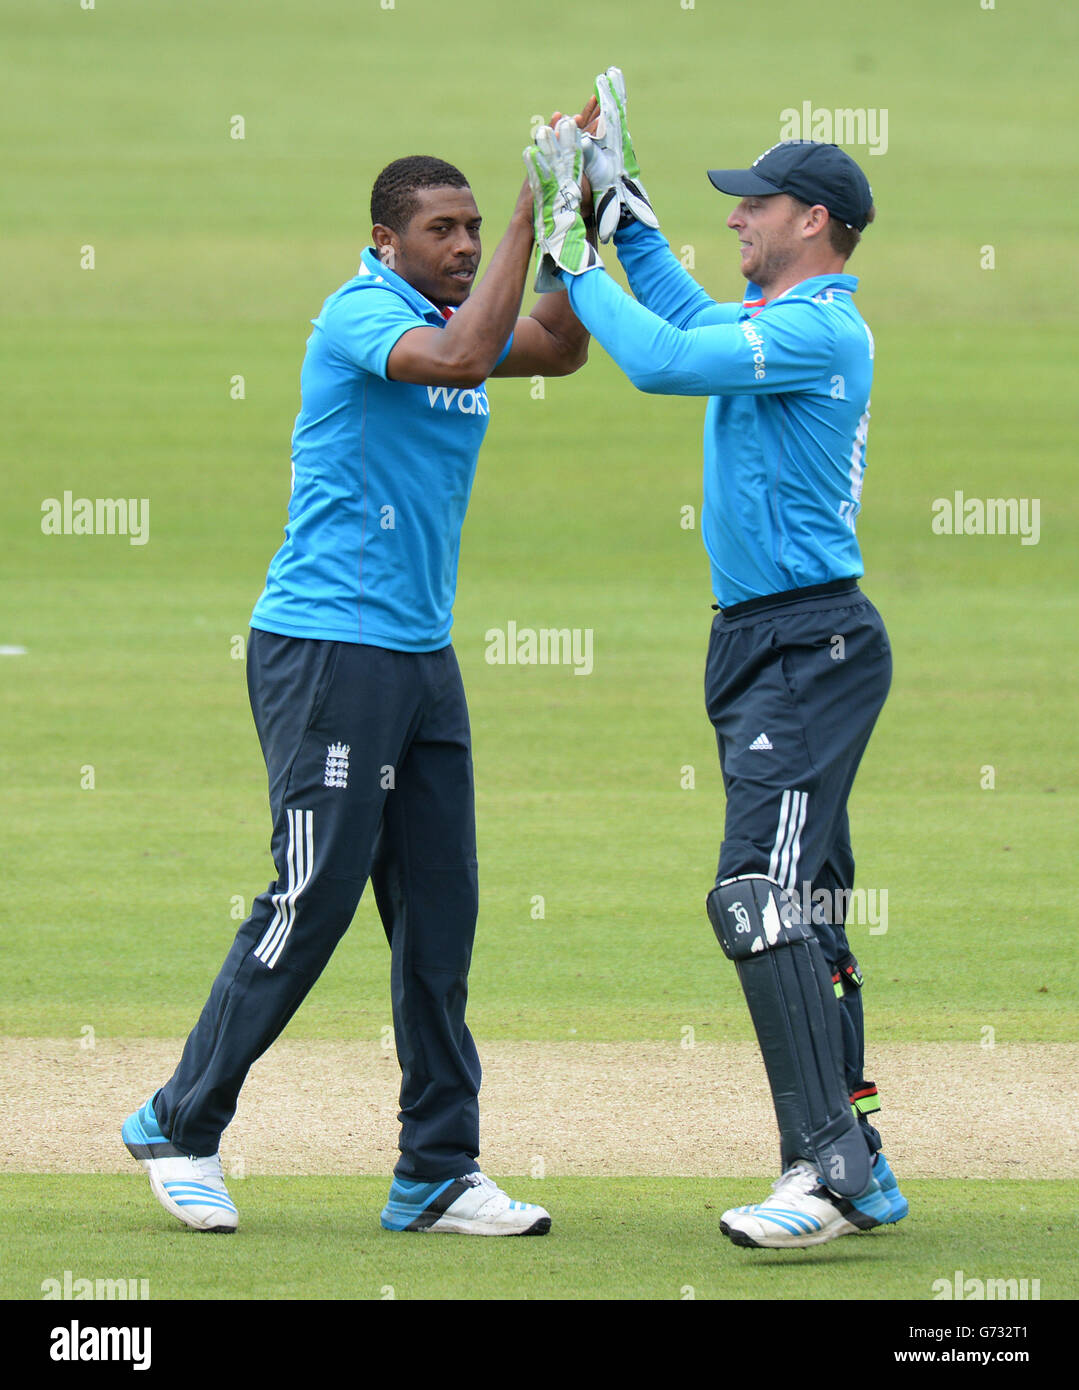 England's Chris Jordan celebrates with Jos Buttler after taking the wicket Sri Lanka's Mahela Jayawardena withduring the Fourth One Day International at Lords Cricket London Stock Photo - Alamy